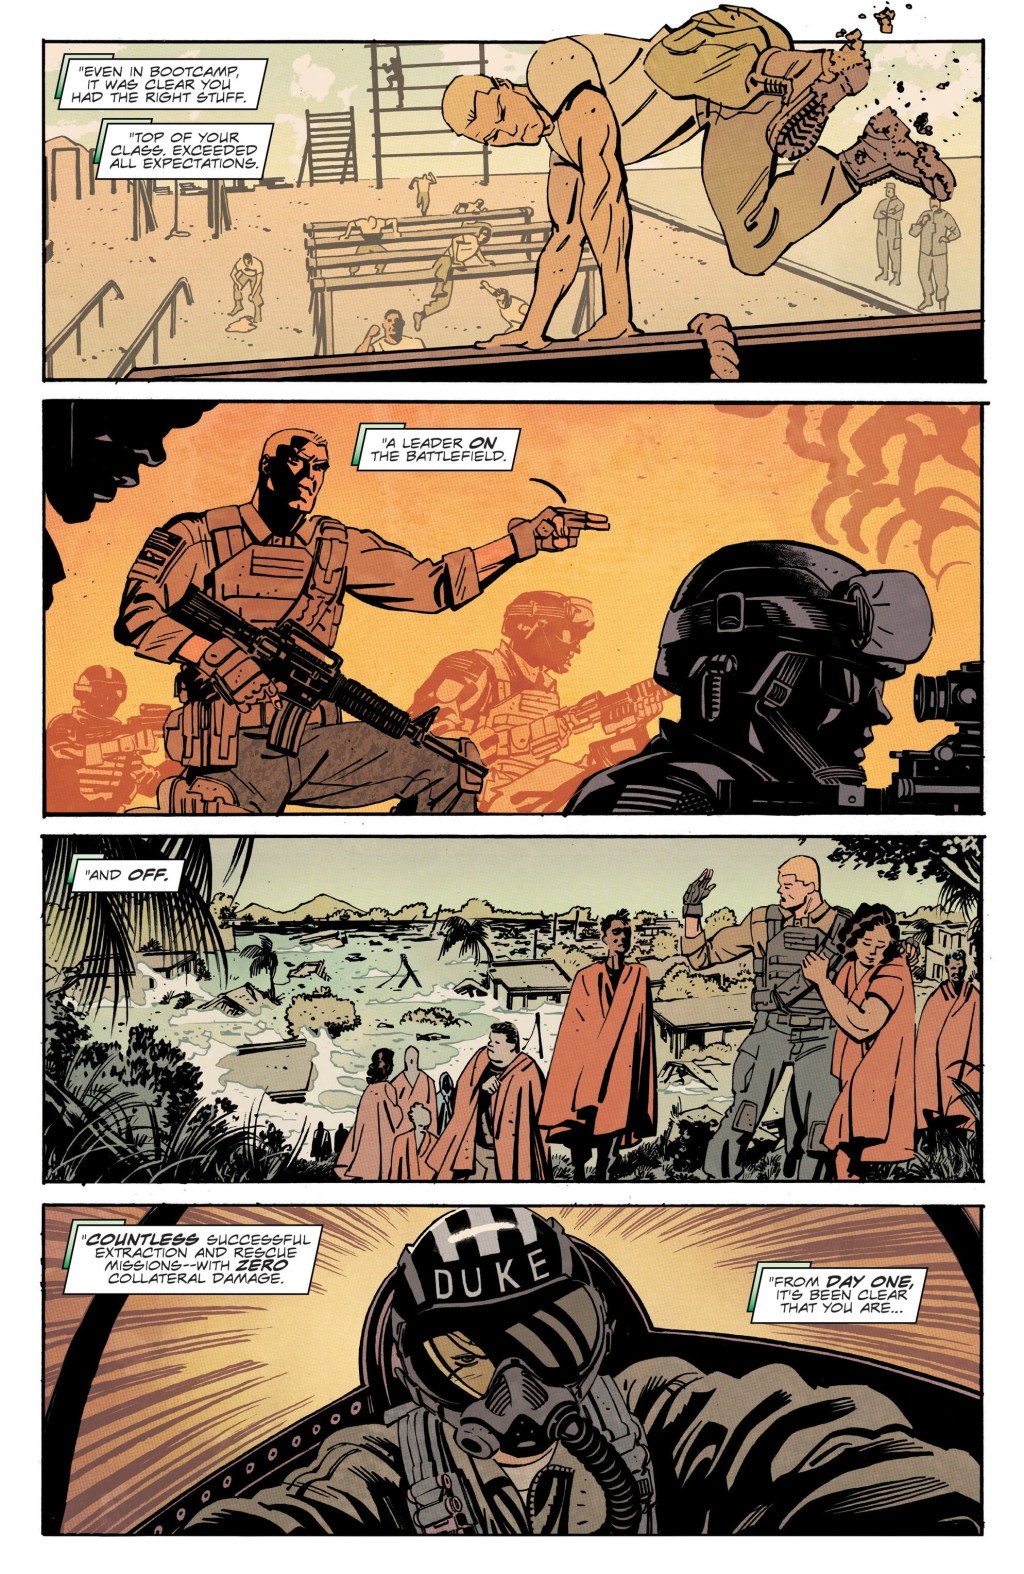 Duke Vol. 1 Issue # 1 (2023), Image Comics. Words by Joshua Williamson. Art by Tom Reilly and Jordie Bellaire.